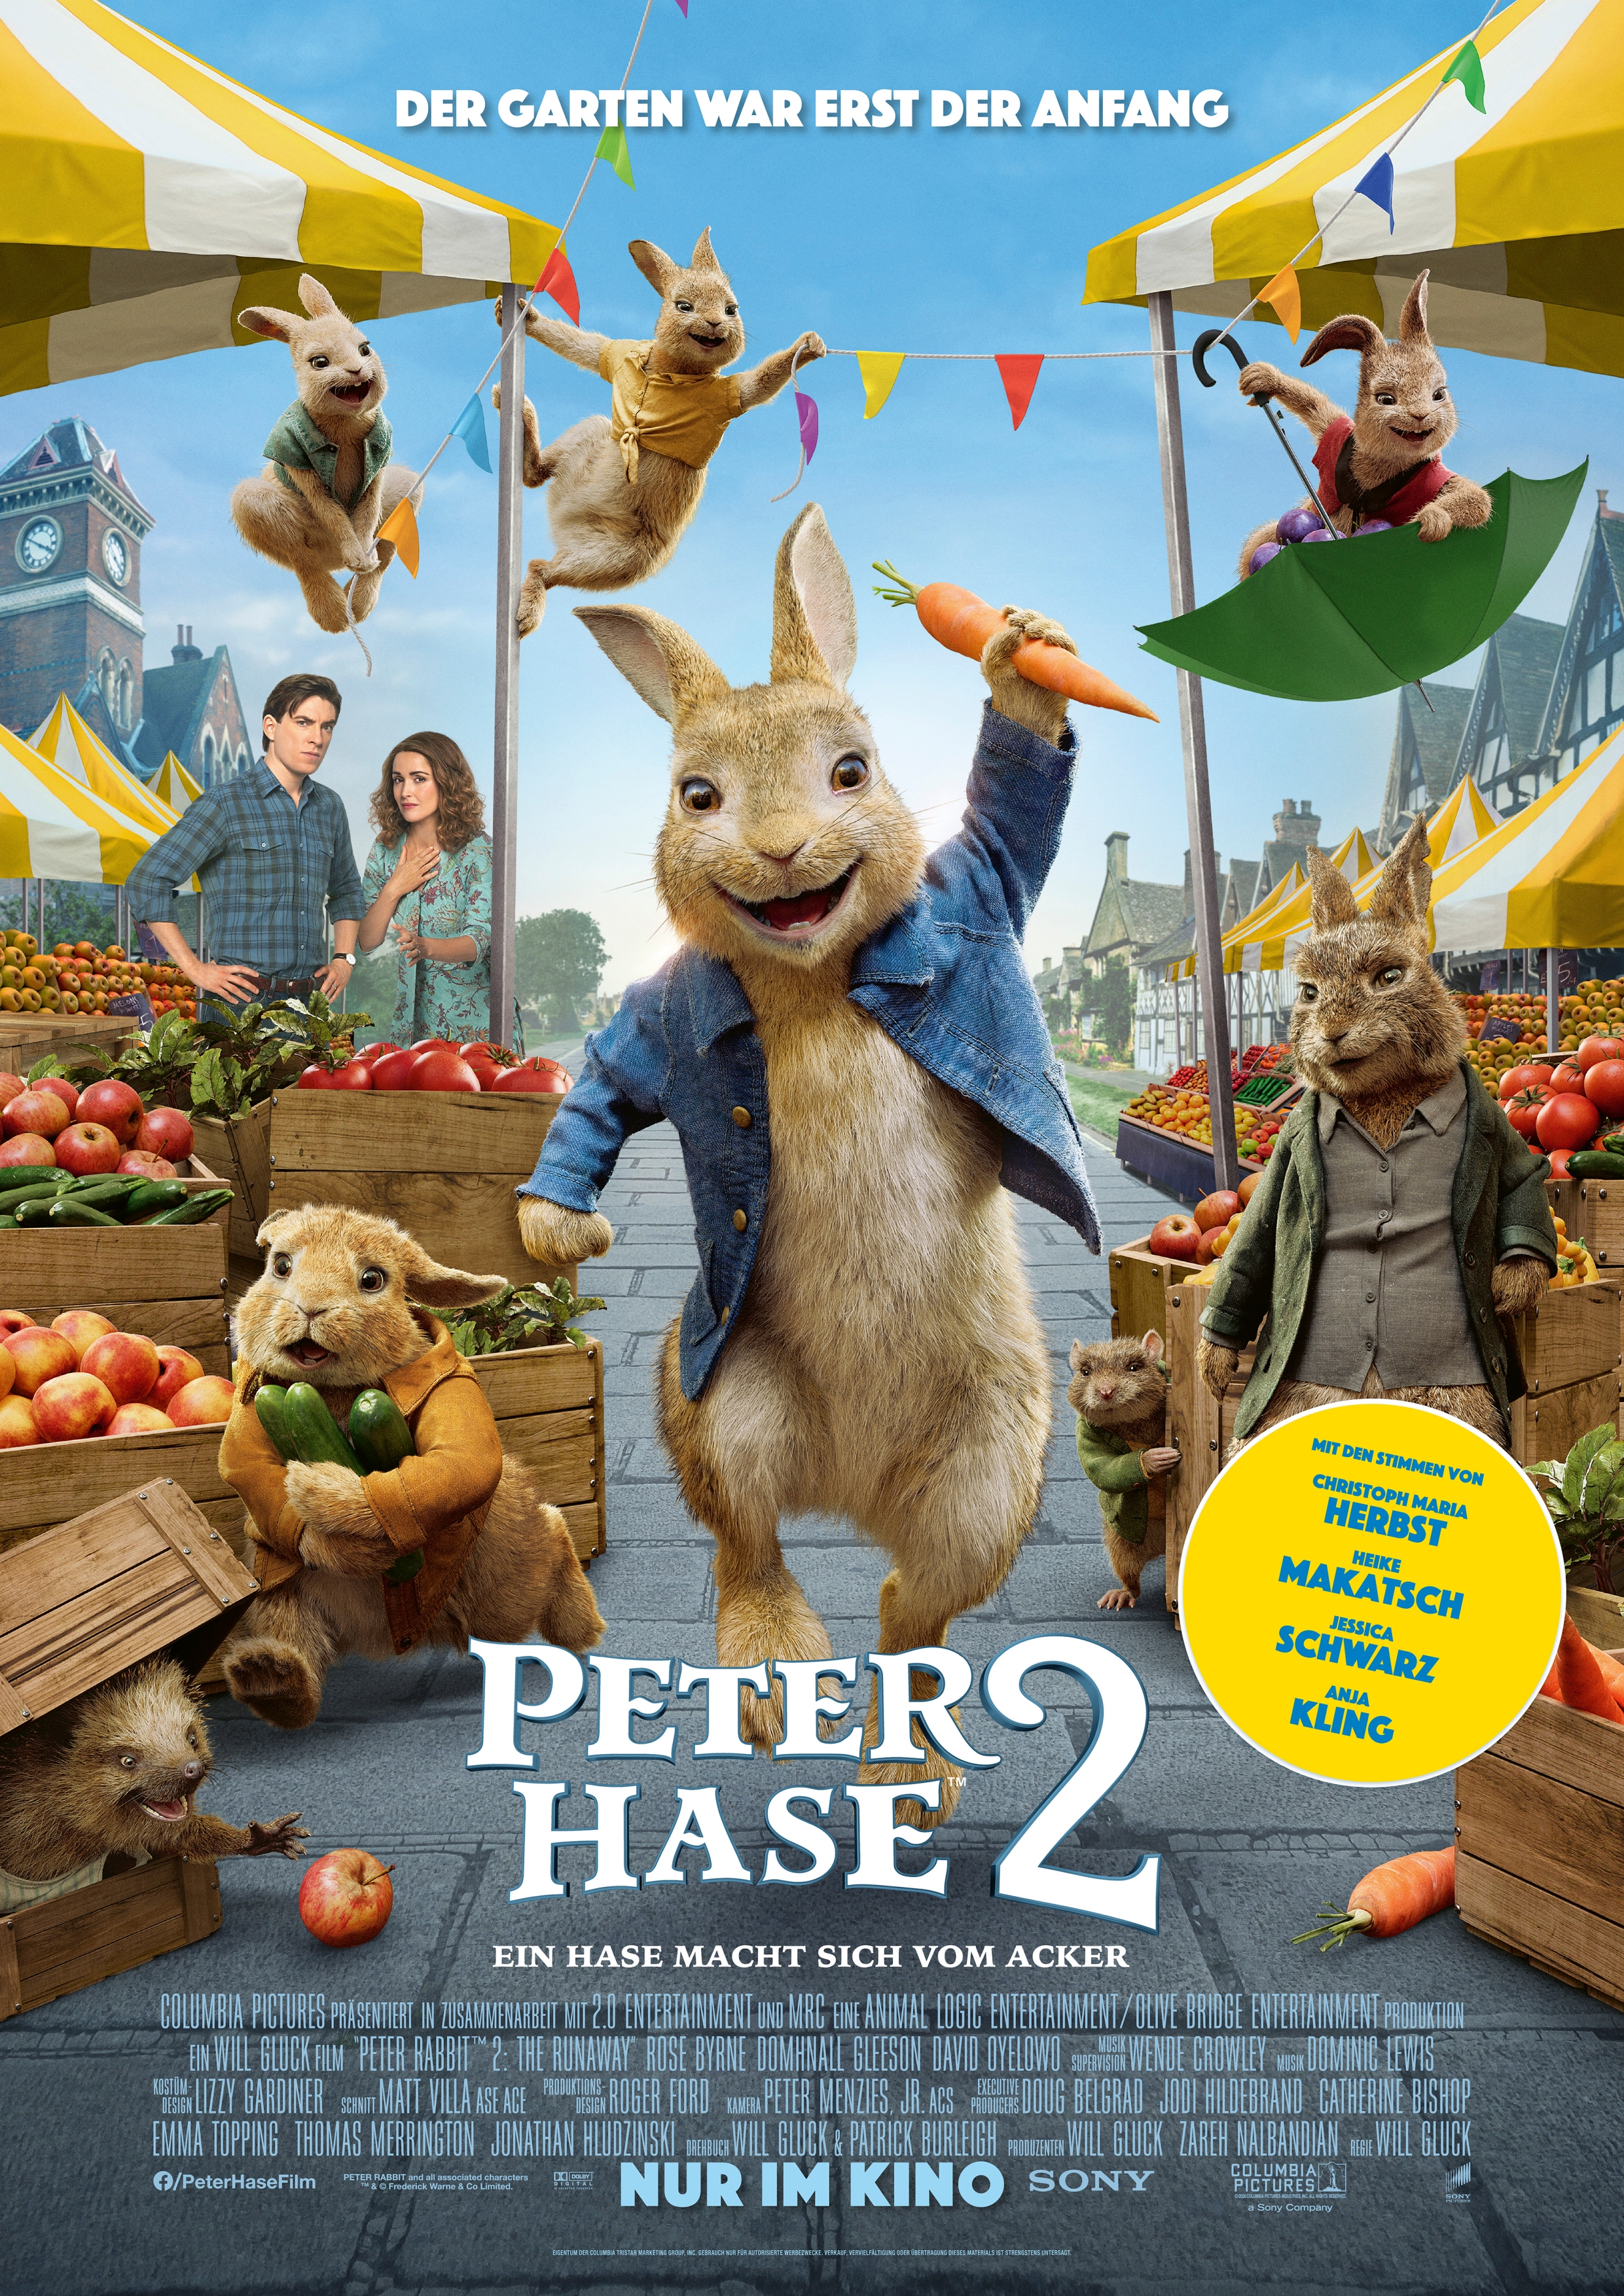 Peter Hase 2 Ab Wann